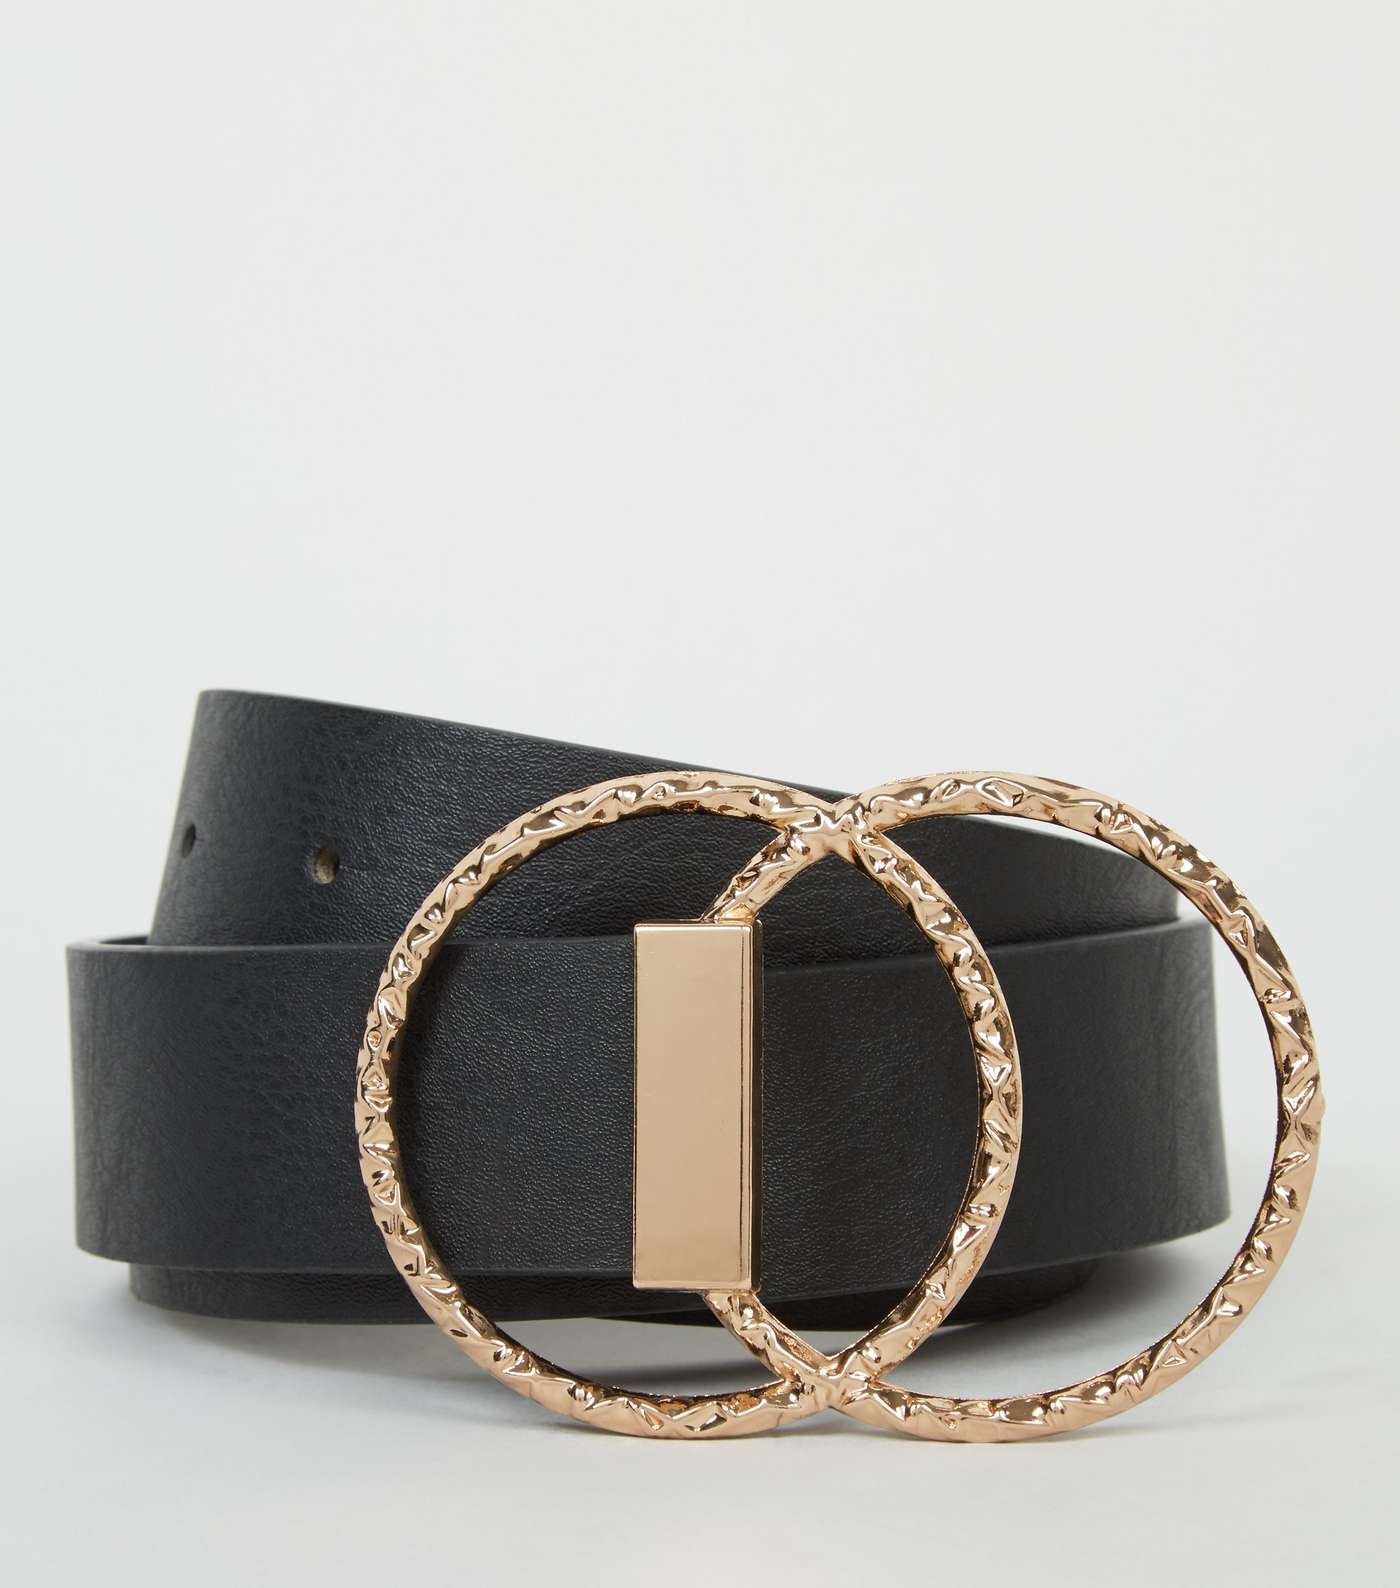 Black Leather-Look Hammered Double Ring Belt Image 2